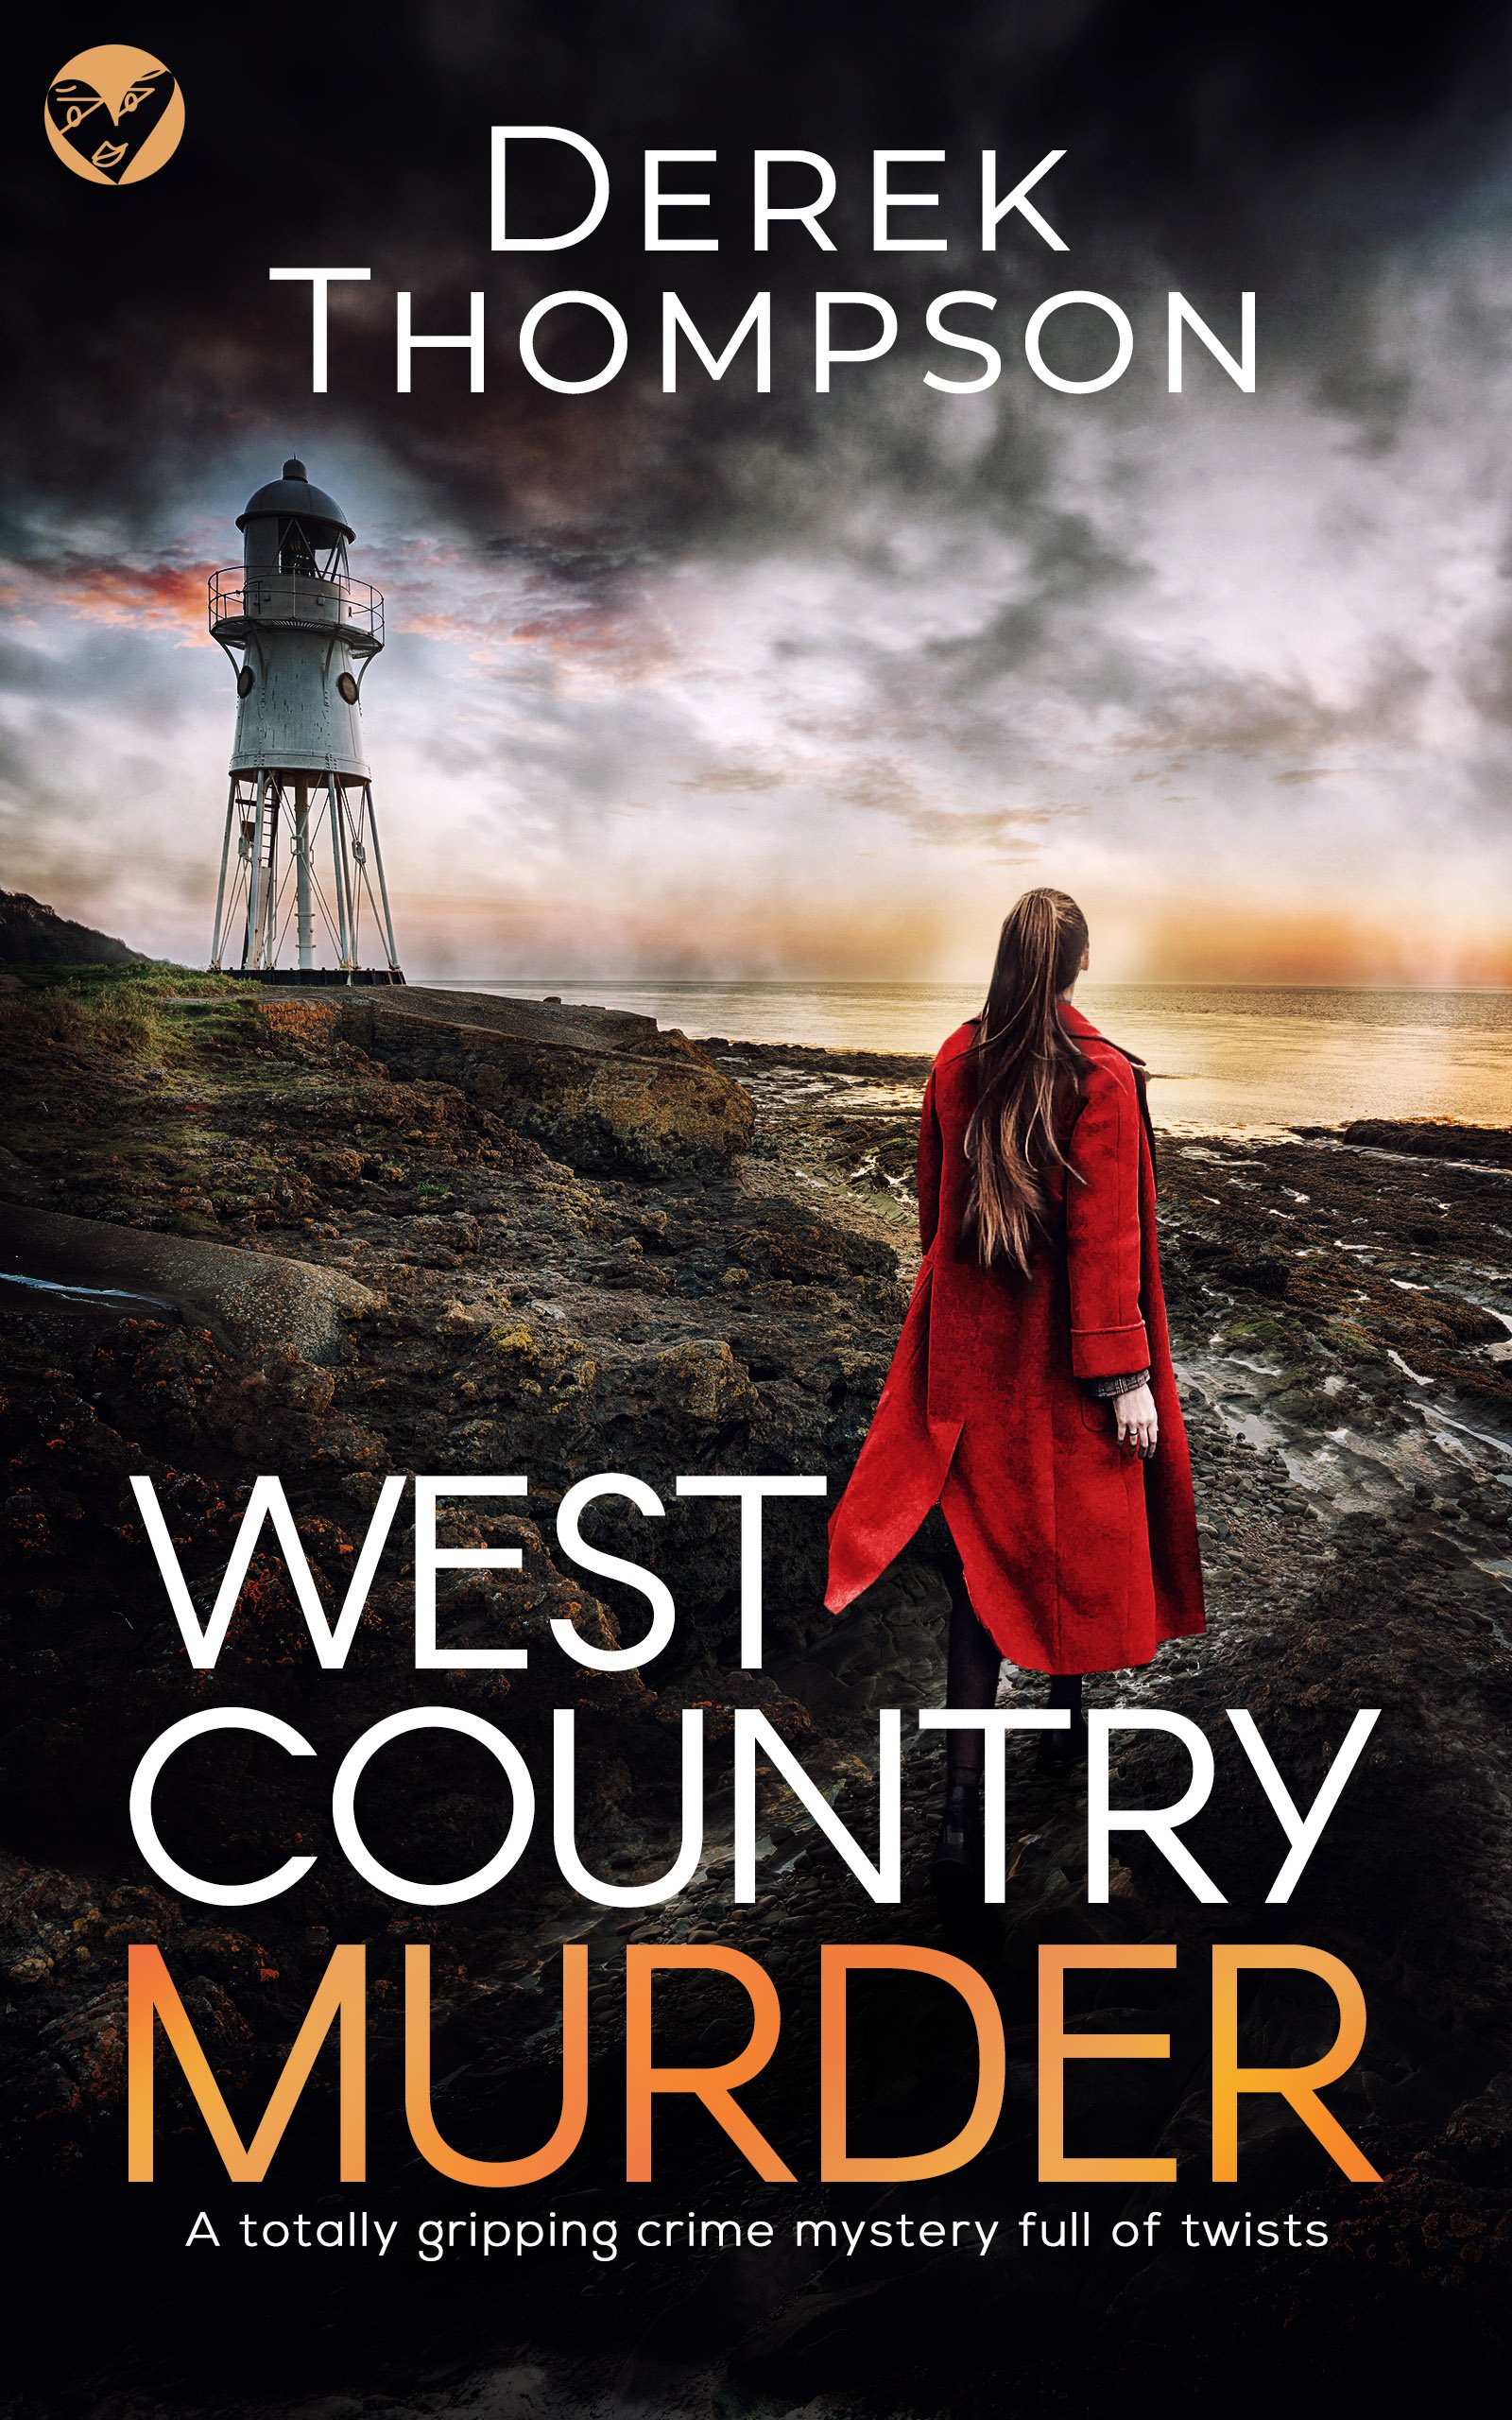 WEST COUNTRY MURDER Cover publish.jpg